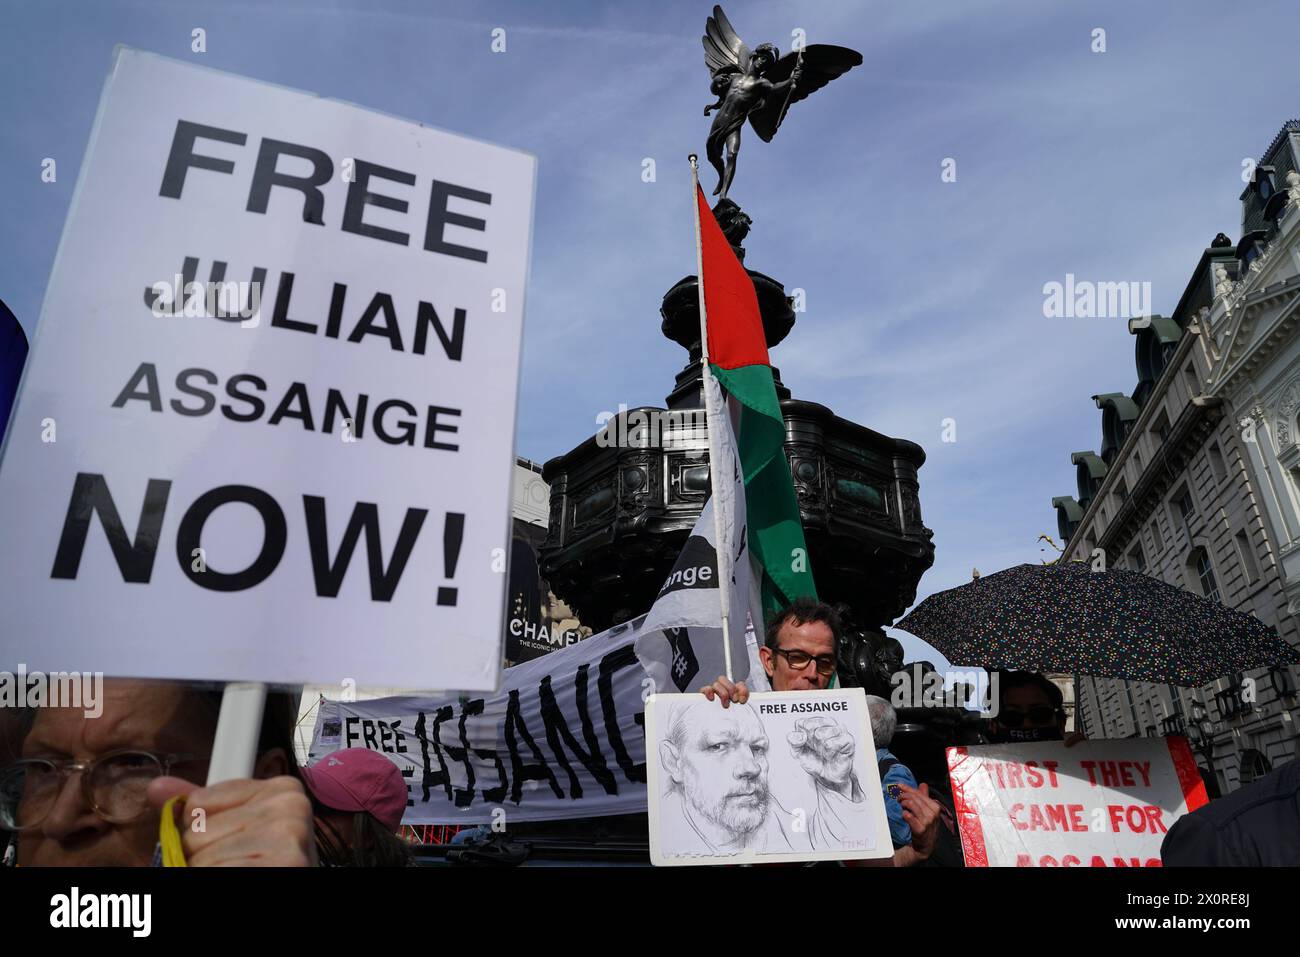 RECORD DATE NOT STATED Protest for Julian Assange at Piccadilly Circus in London Protest for Julian Assange at Piccadilly Circus in London. This week marks 5 years since his capture and incarceration. London England United Kingdom Copyright: xJoaoxDanielxPereirax Stock Photo